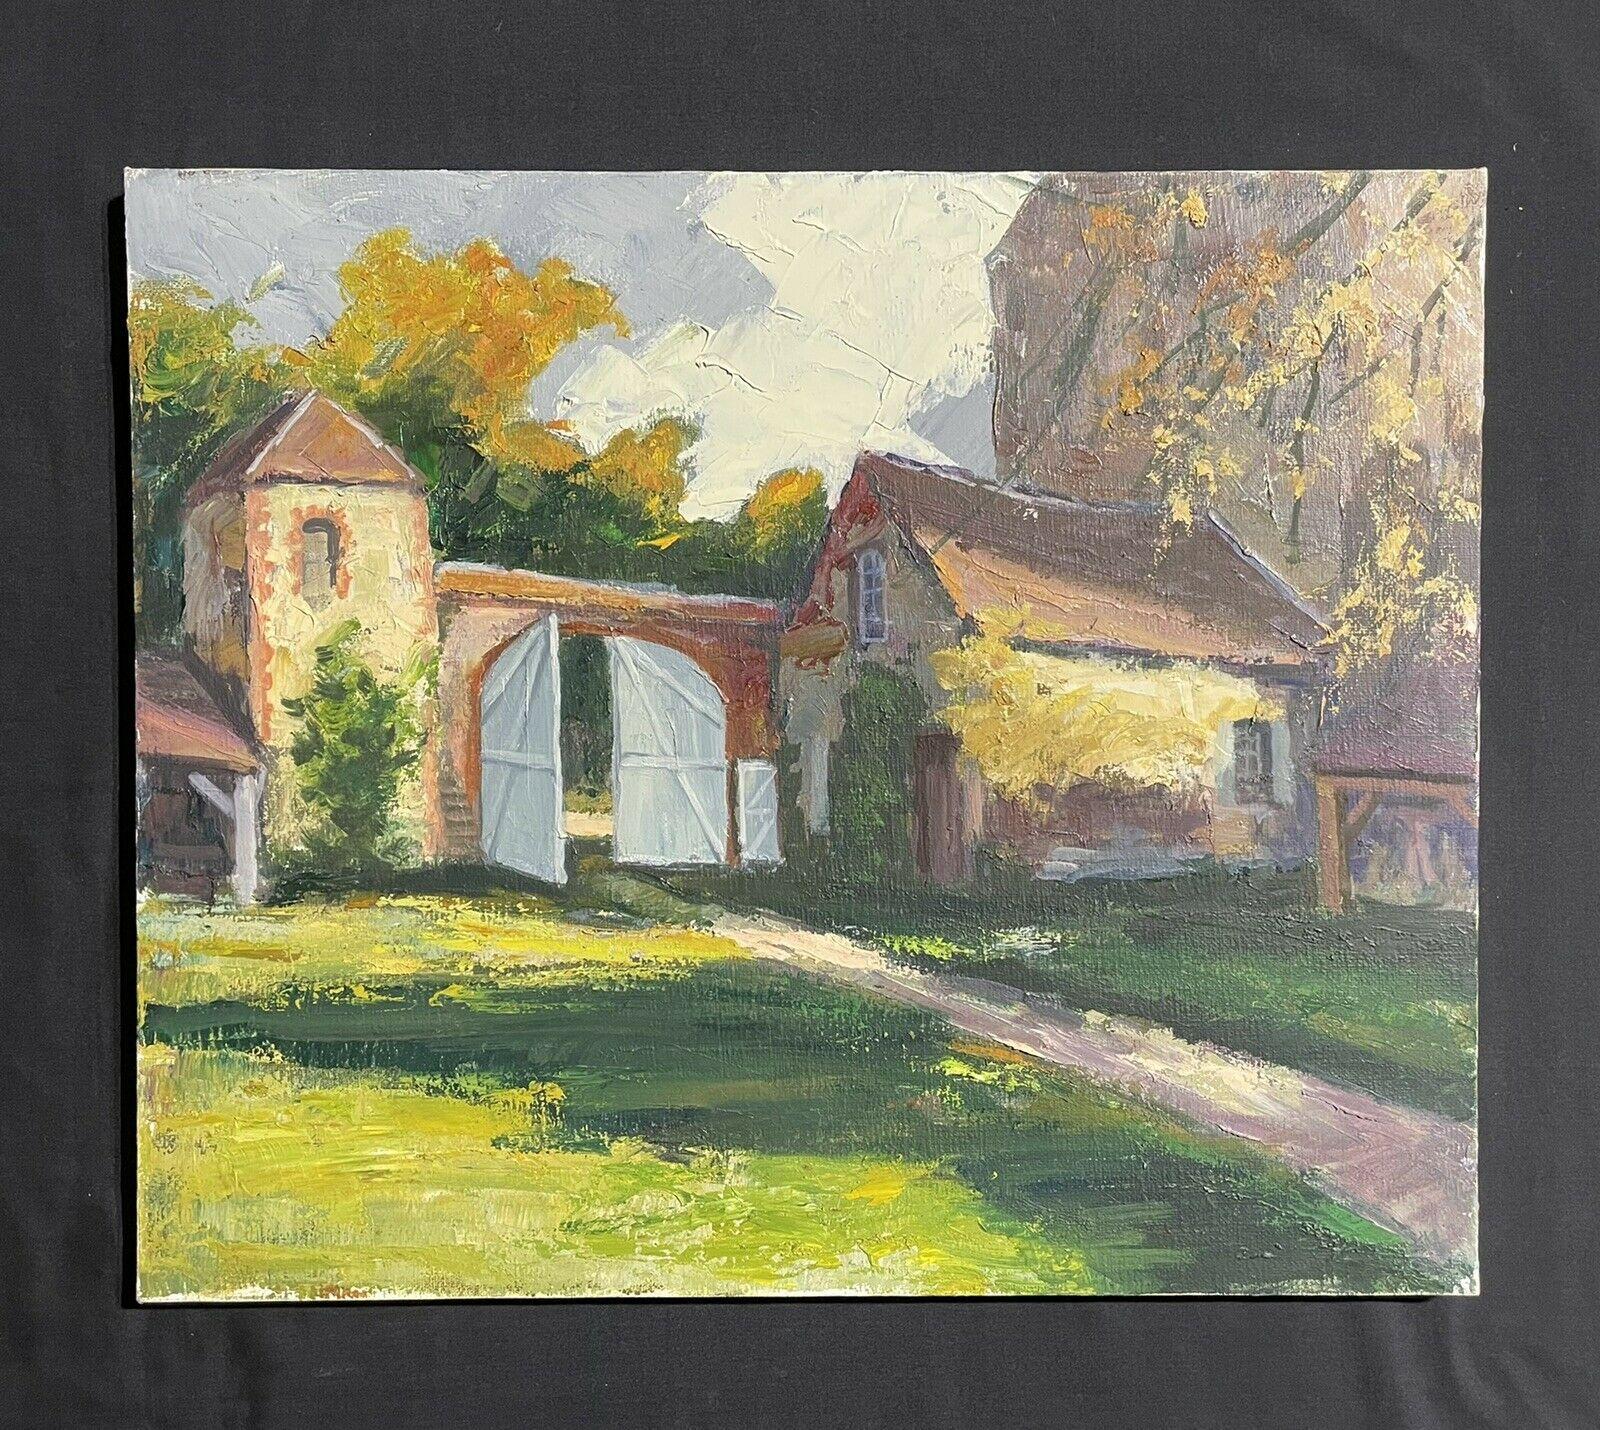 ROBERT FALCUCCI (1900-1989) MID 20TH CENTURY FRENCH IMPRESSIONIST OIL - CHATEAU - Painting by Robert Falcucci